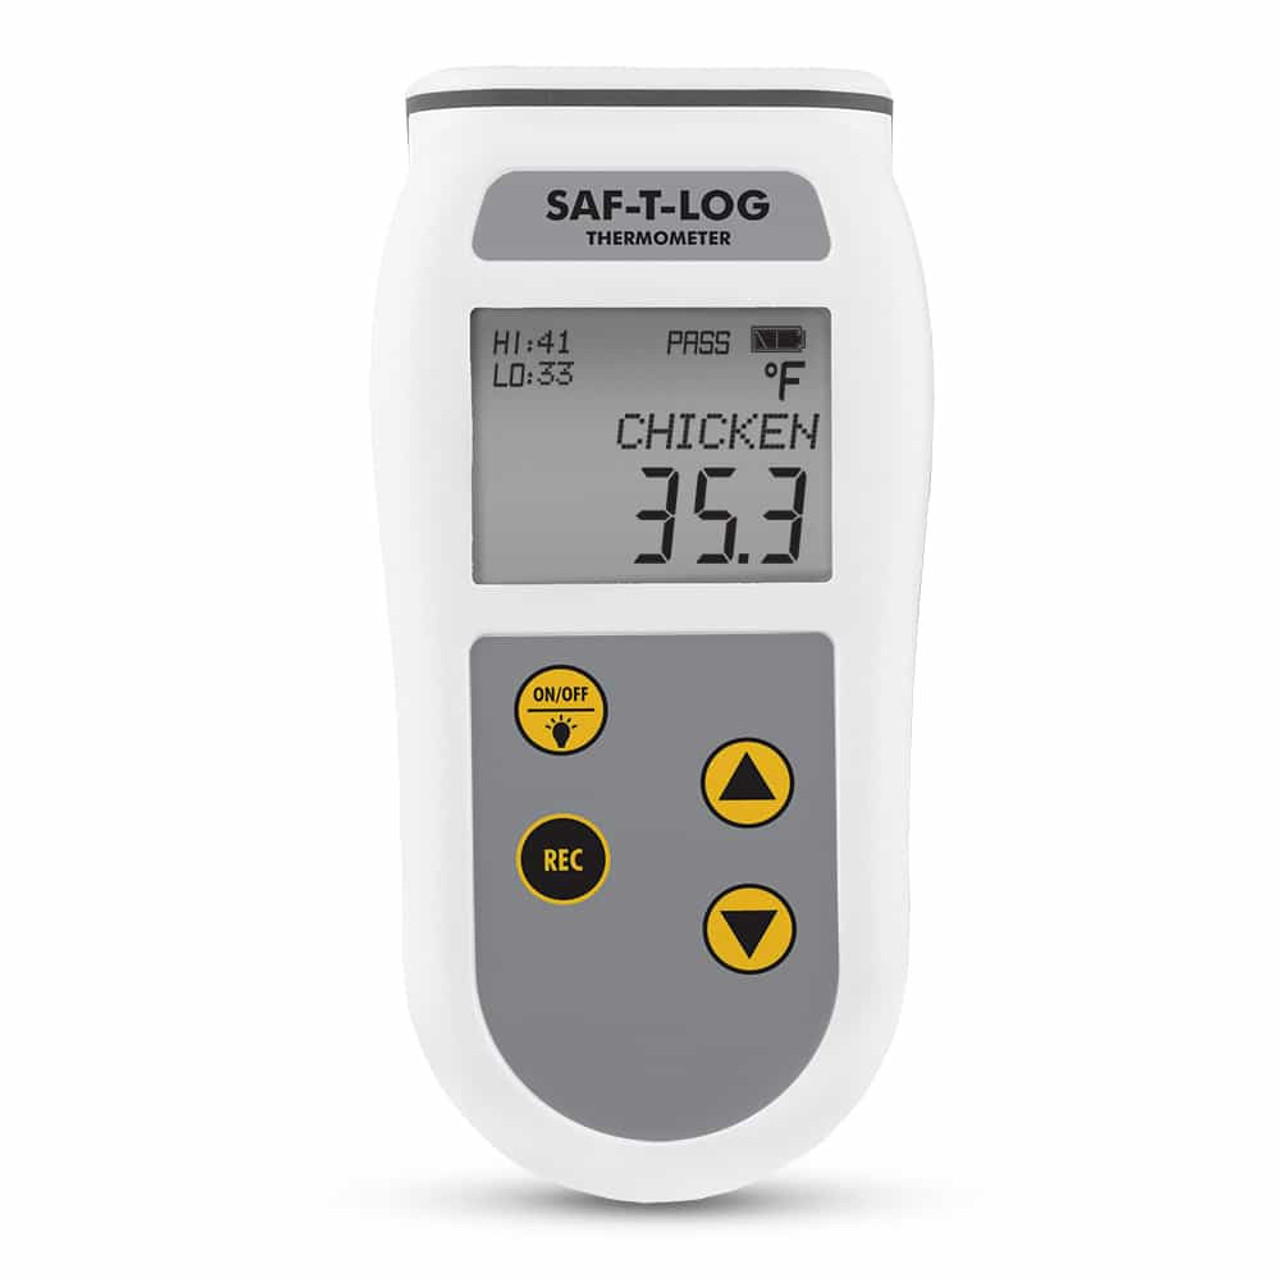 Test the Temperature – Use a Thermometer for Food Safety - Unlock Food